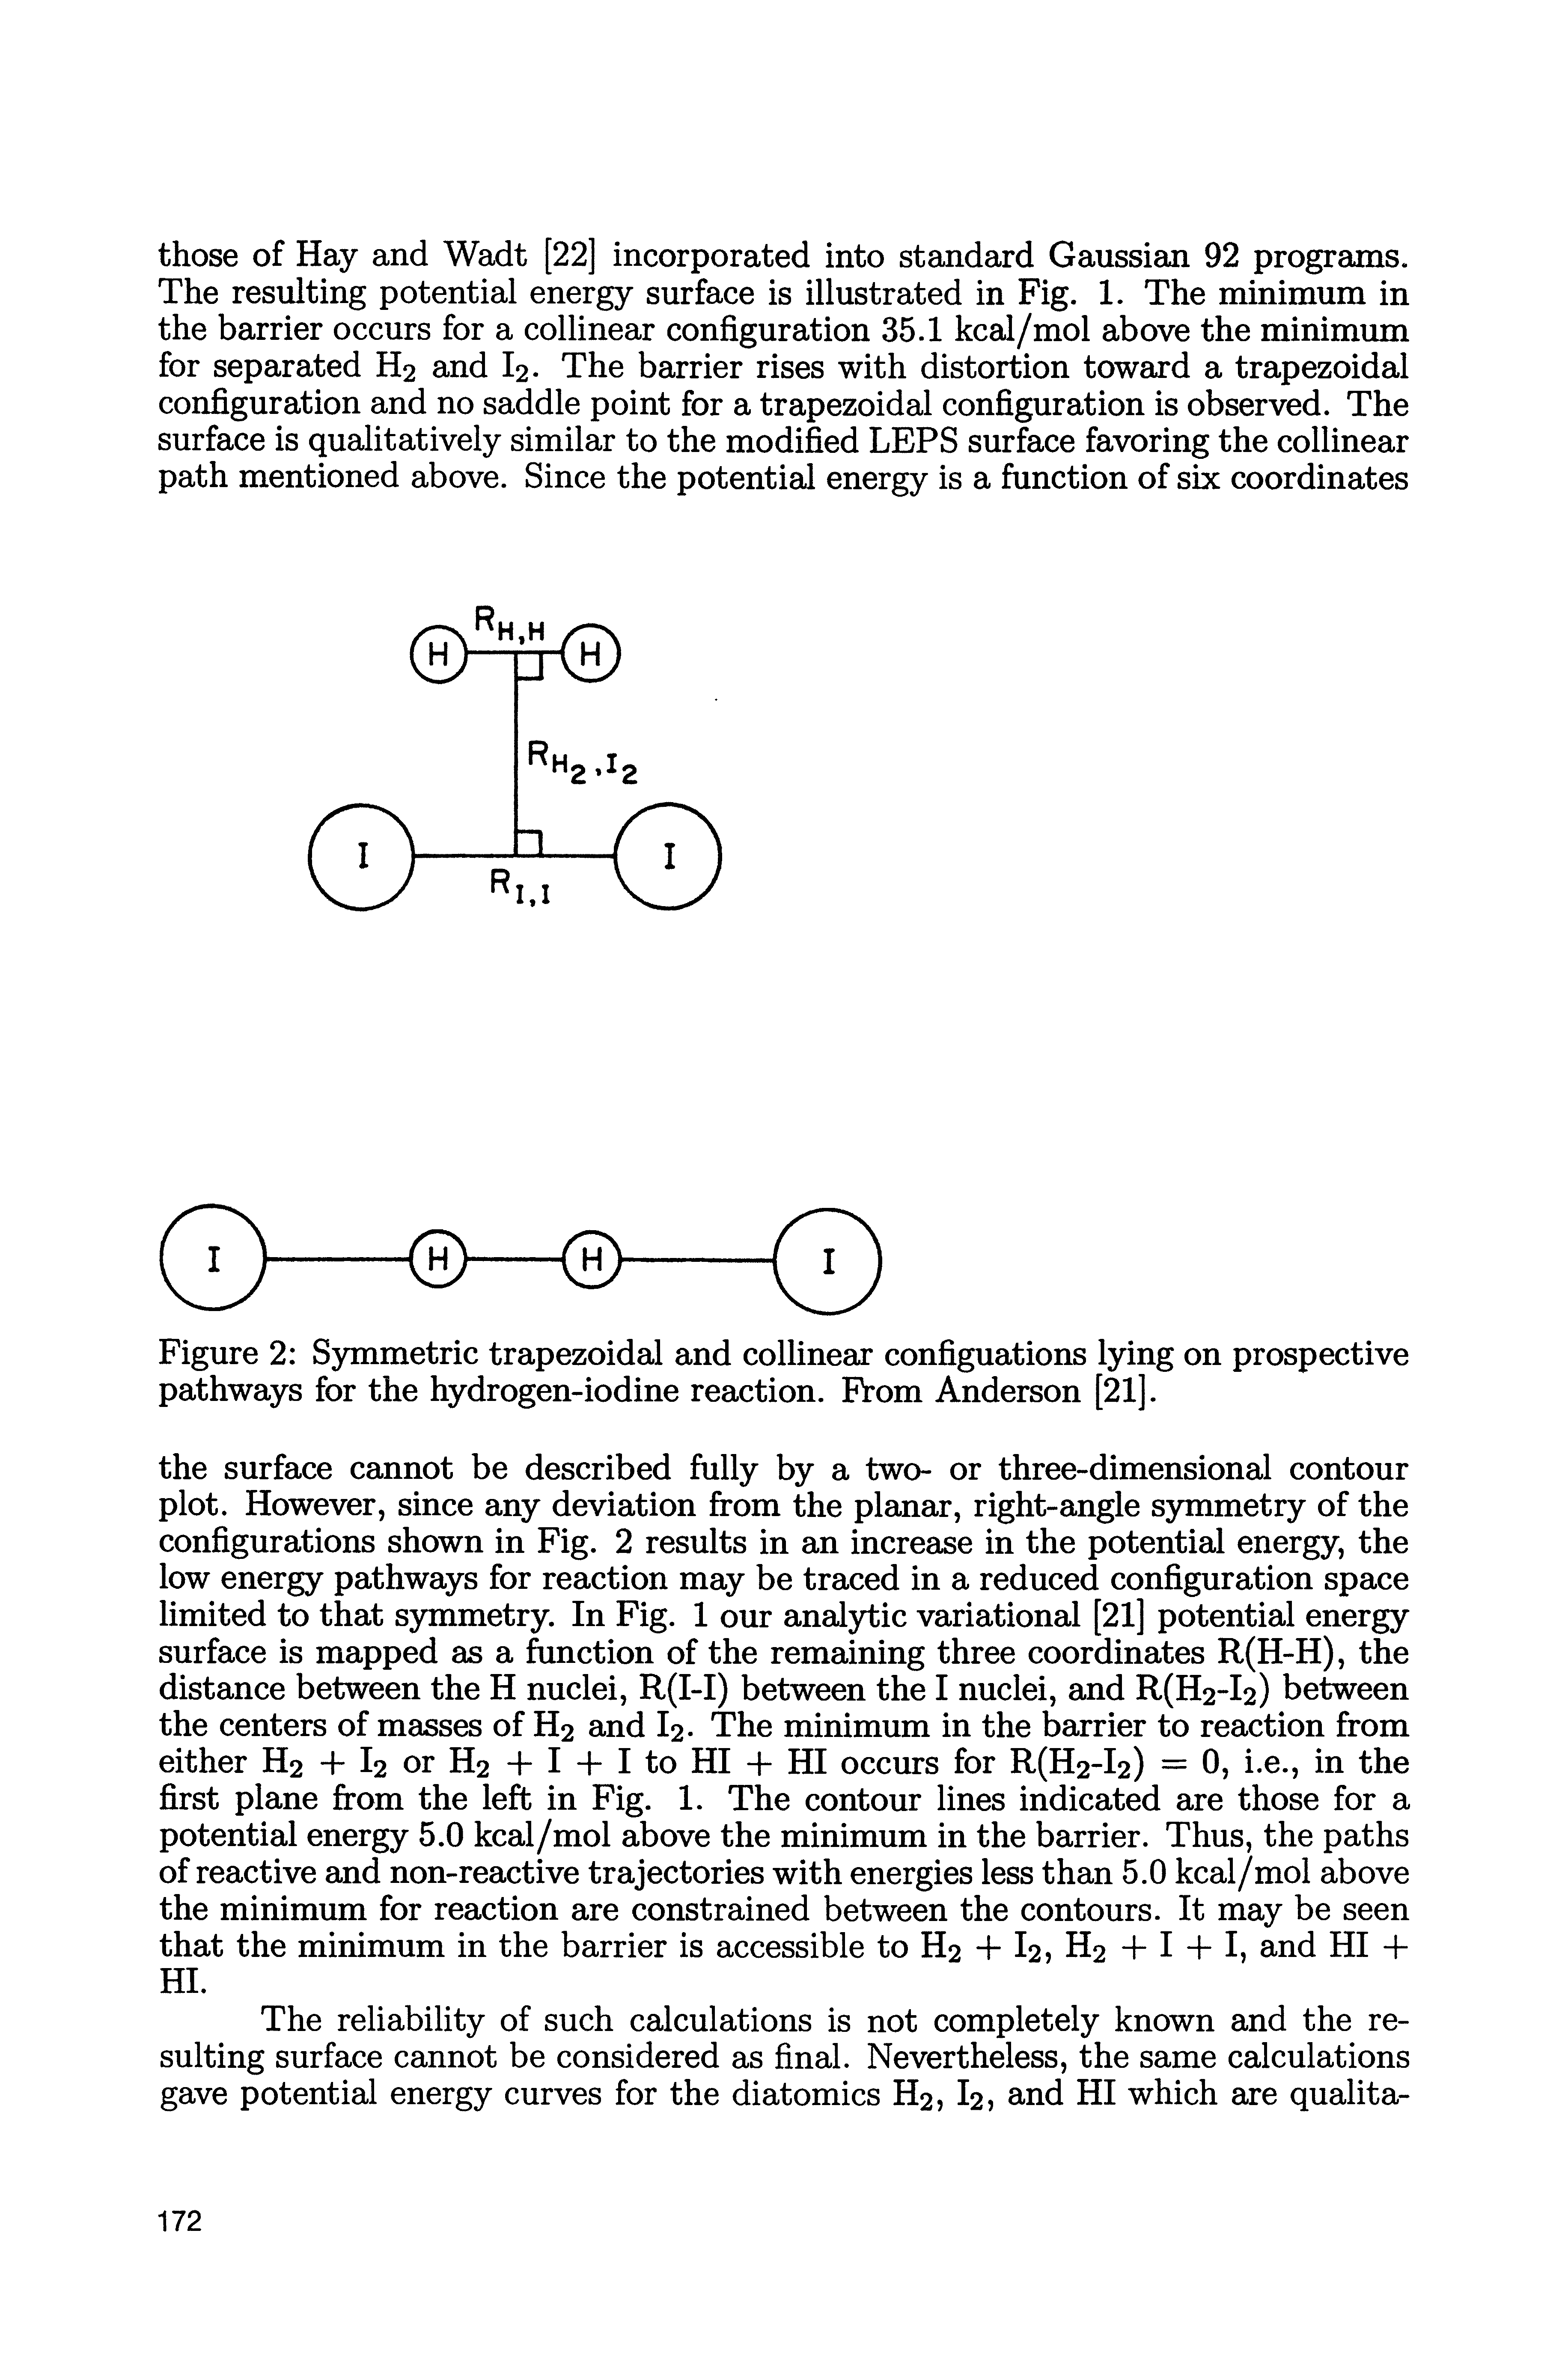 Figure 2 Symmetric trapezoidal and collinear configuations lying on prospective pathways for the hydrogen-iodine reaction. From Anderson [21].